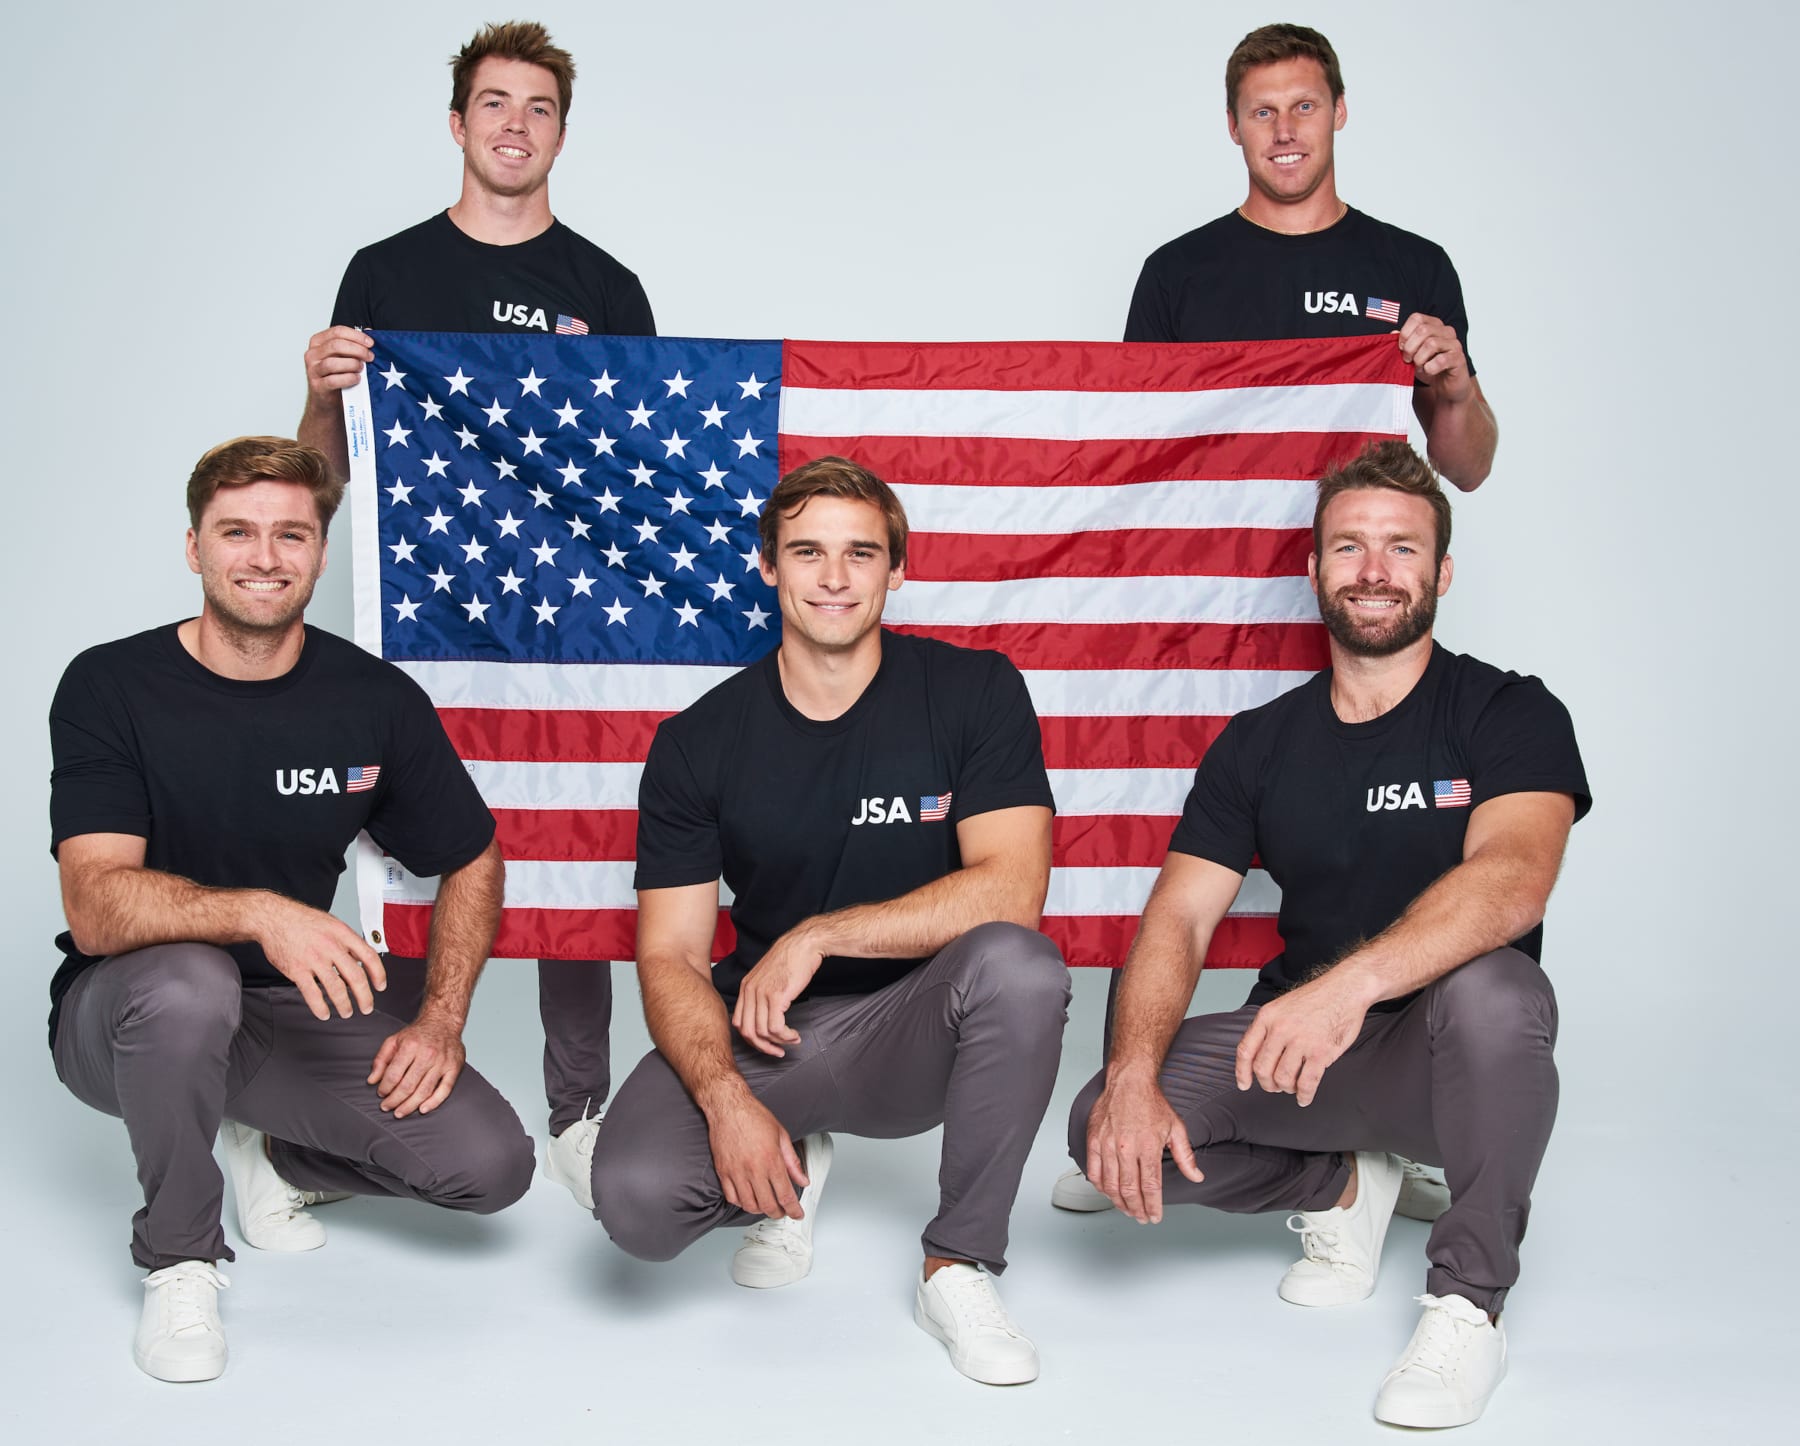 United States SailGP team pose for a team photo with their national flag. Standing left to right: Riley Gibbs USA and Rome Kirby USA. Kneeling left to right: Hans Henken USA, Mac Agnese USA and Dan Morris USA. 09 October 2018. Photo: Getty Images for SailGP